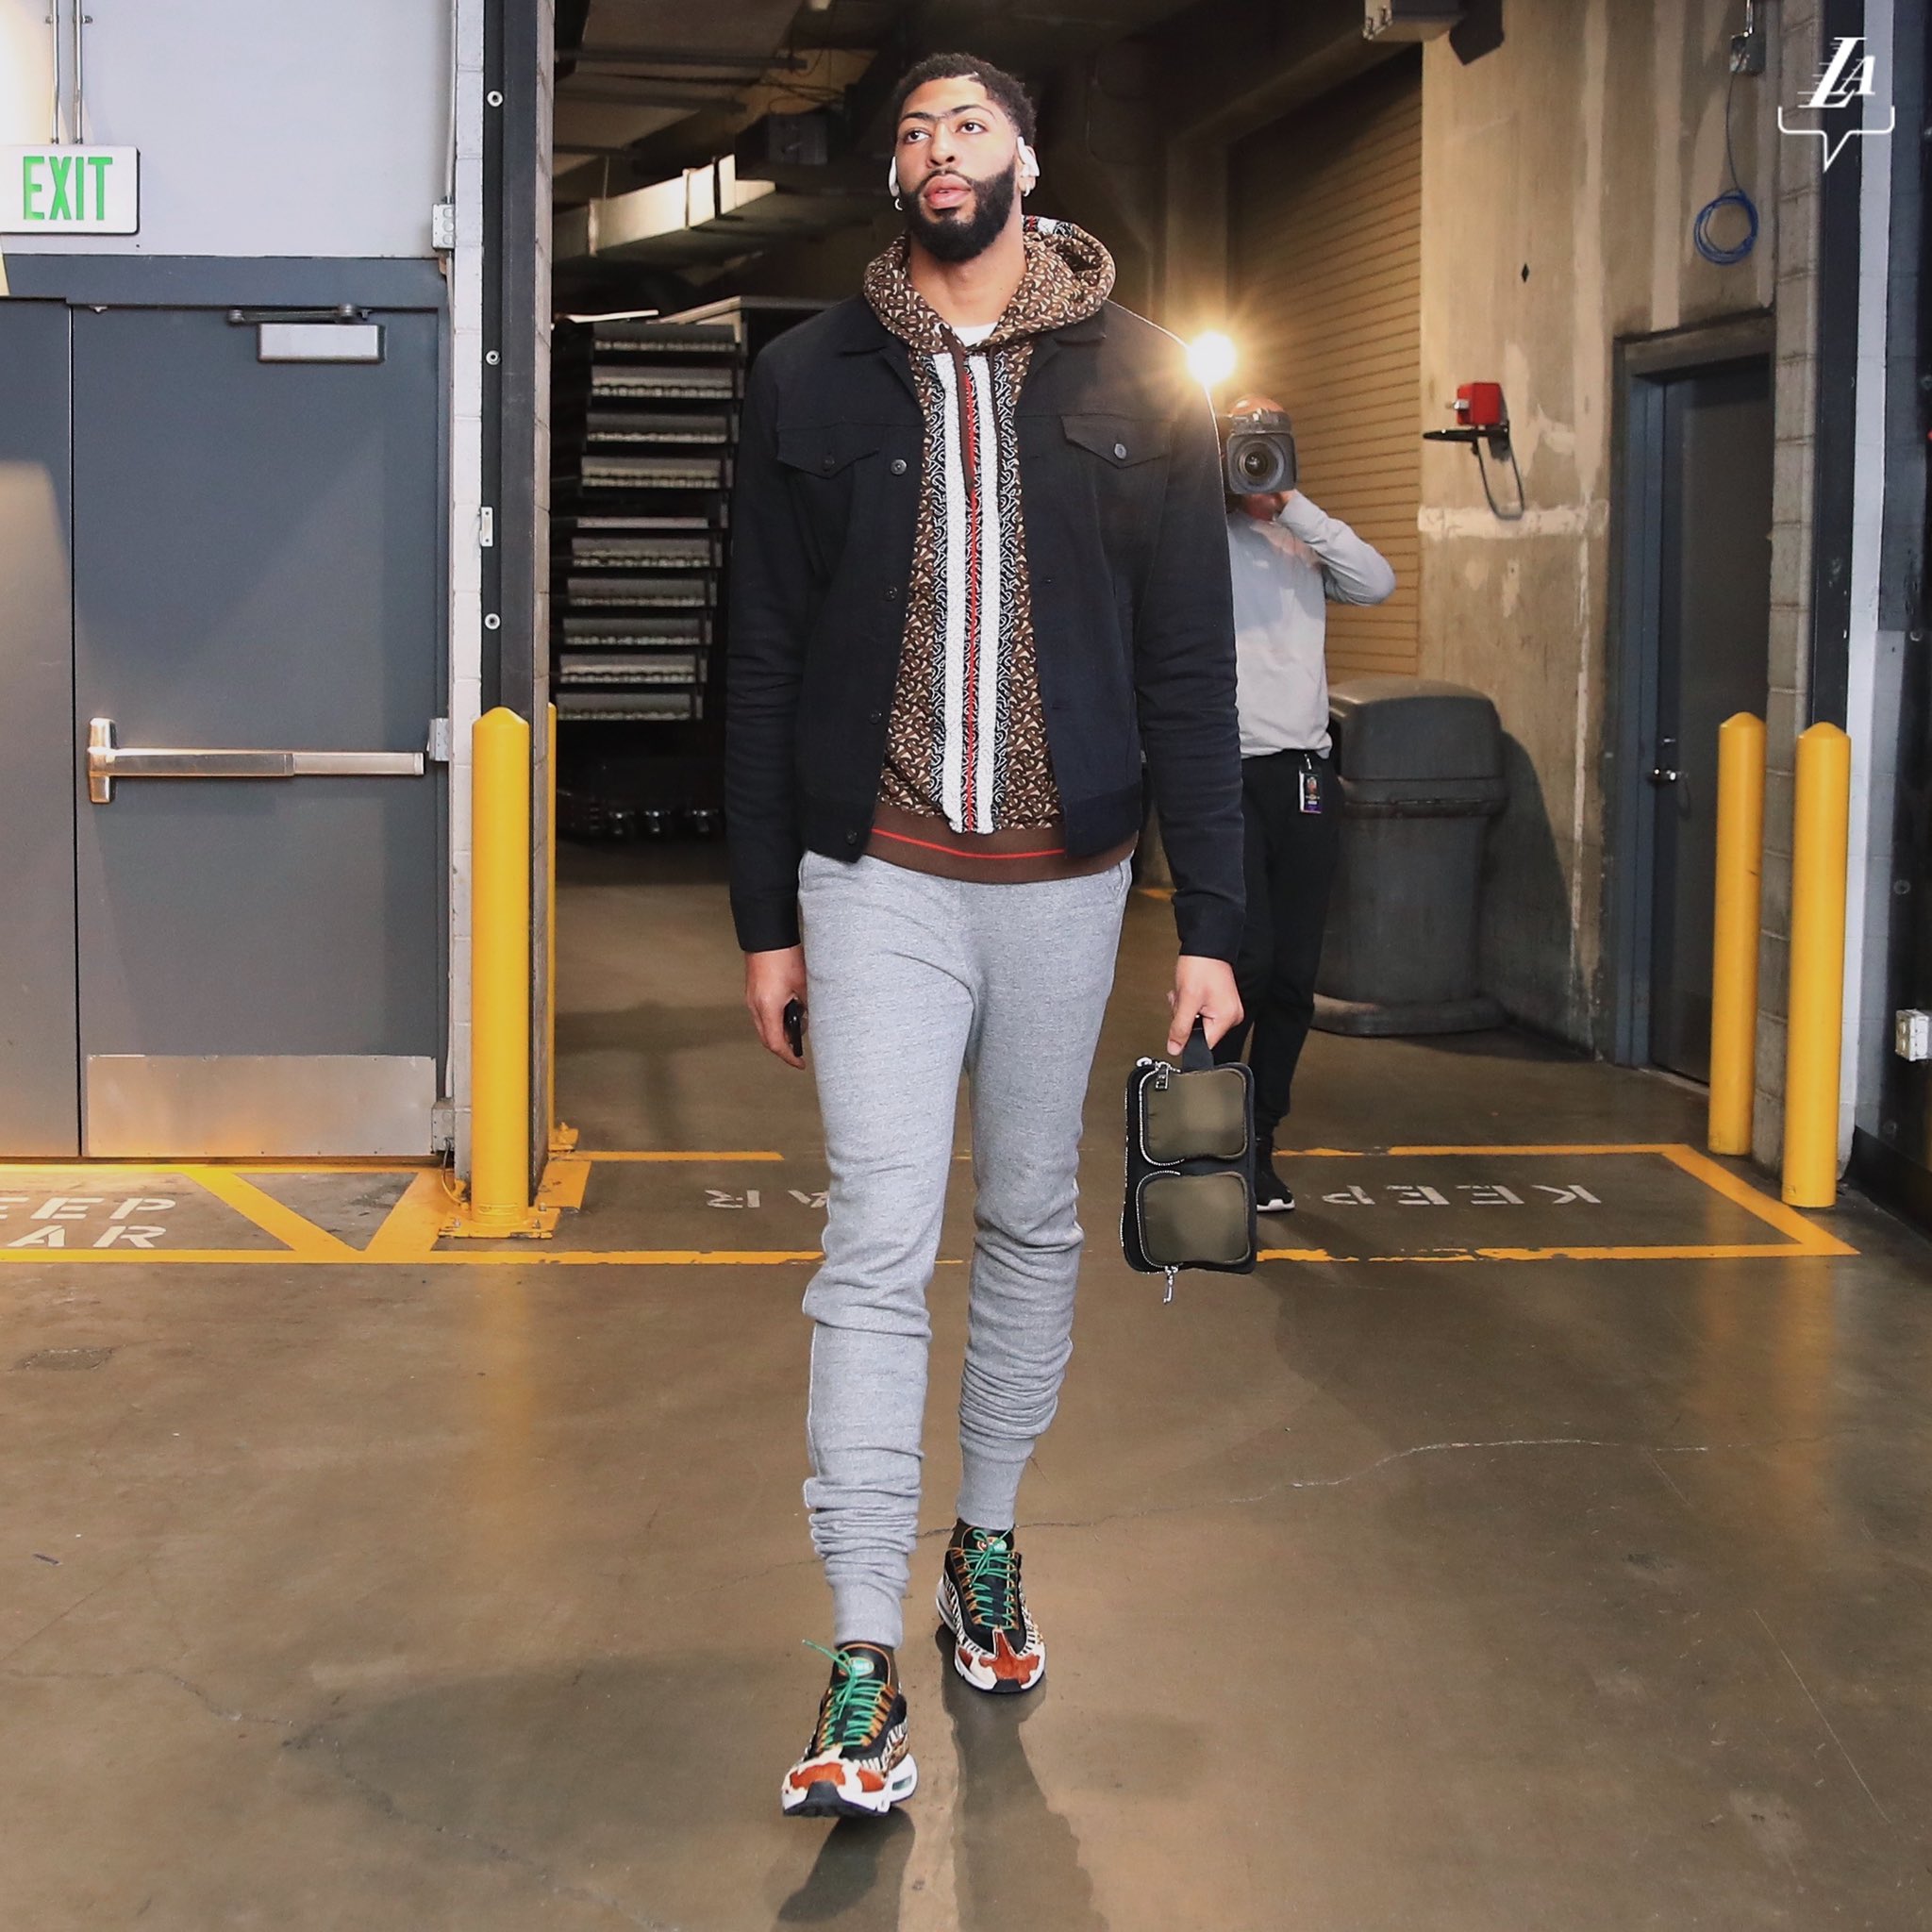 Anthony Davis vs KING James - Who's the best dresser at Lakers?